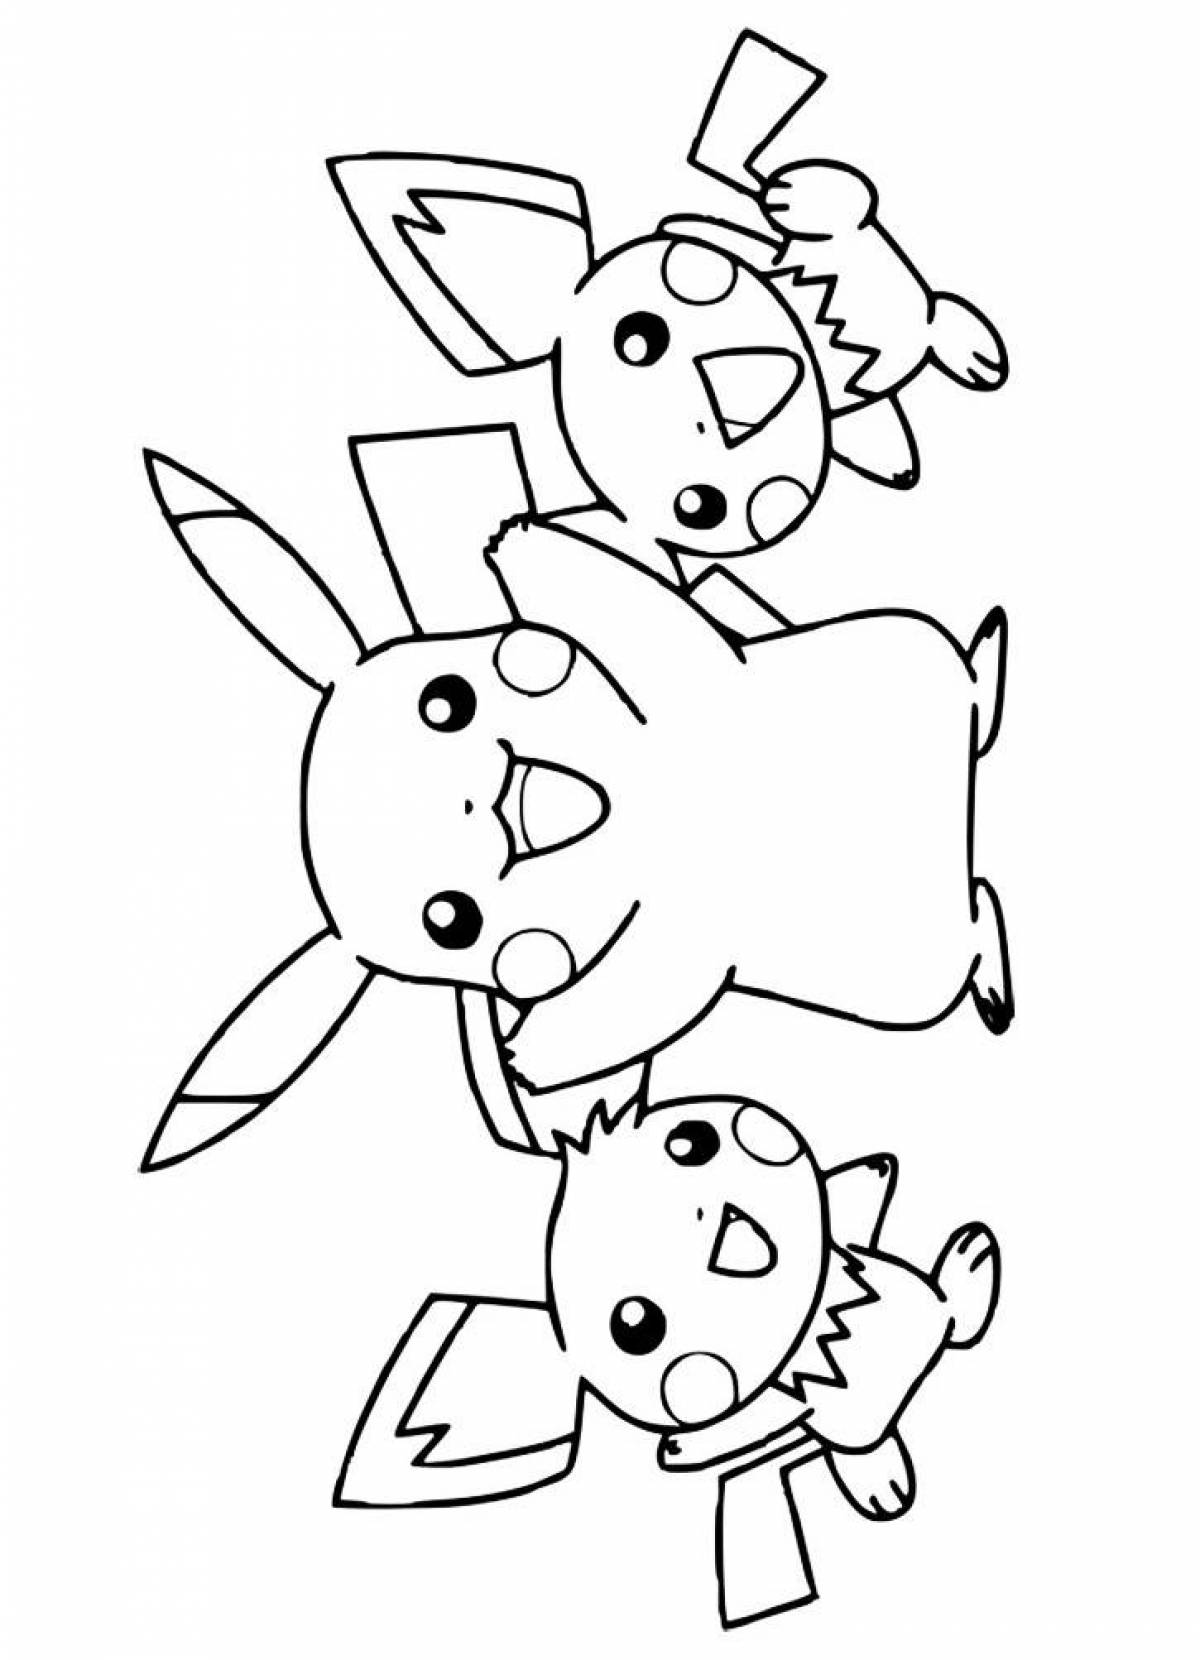 Glowing pikachu coloring page